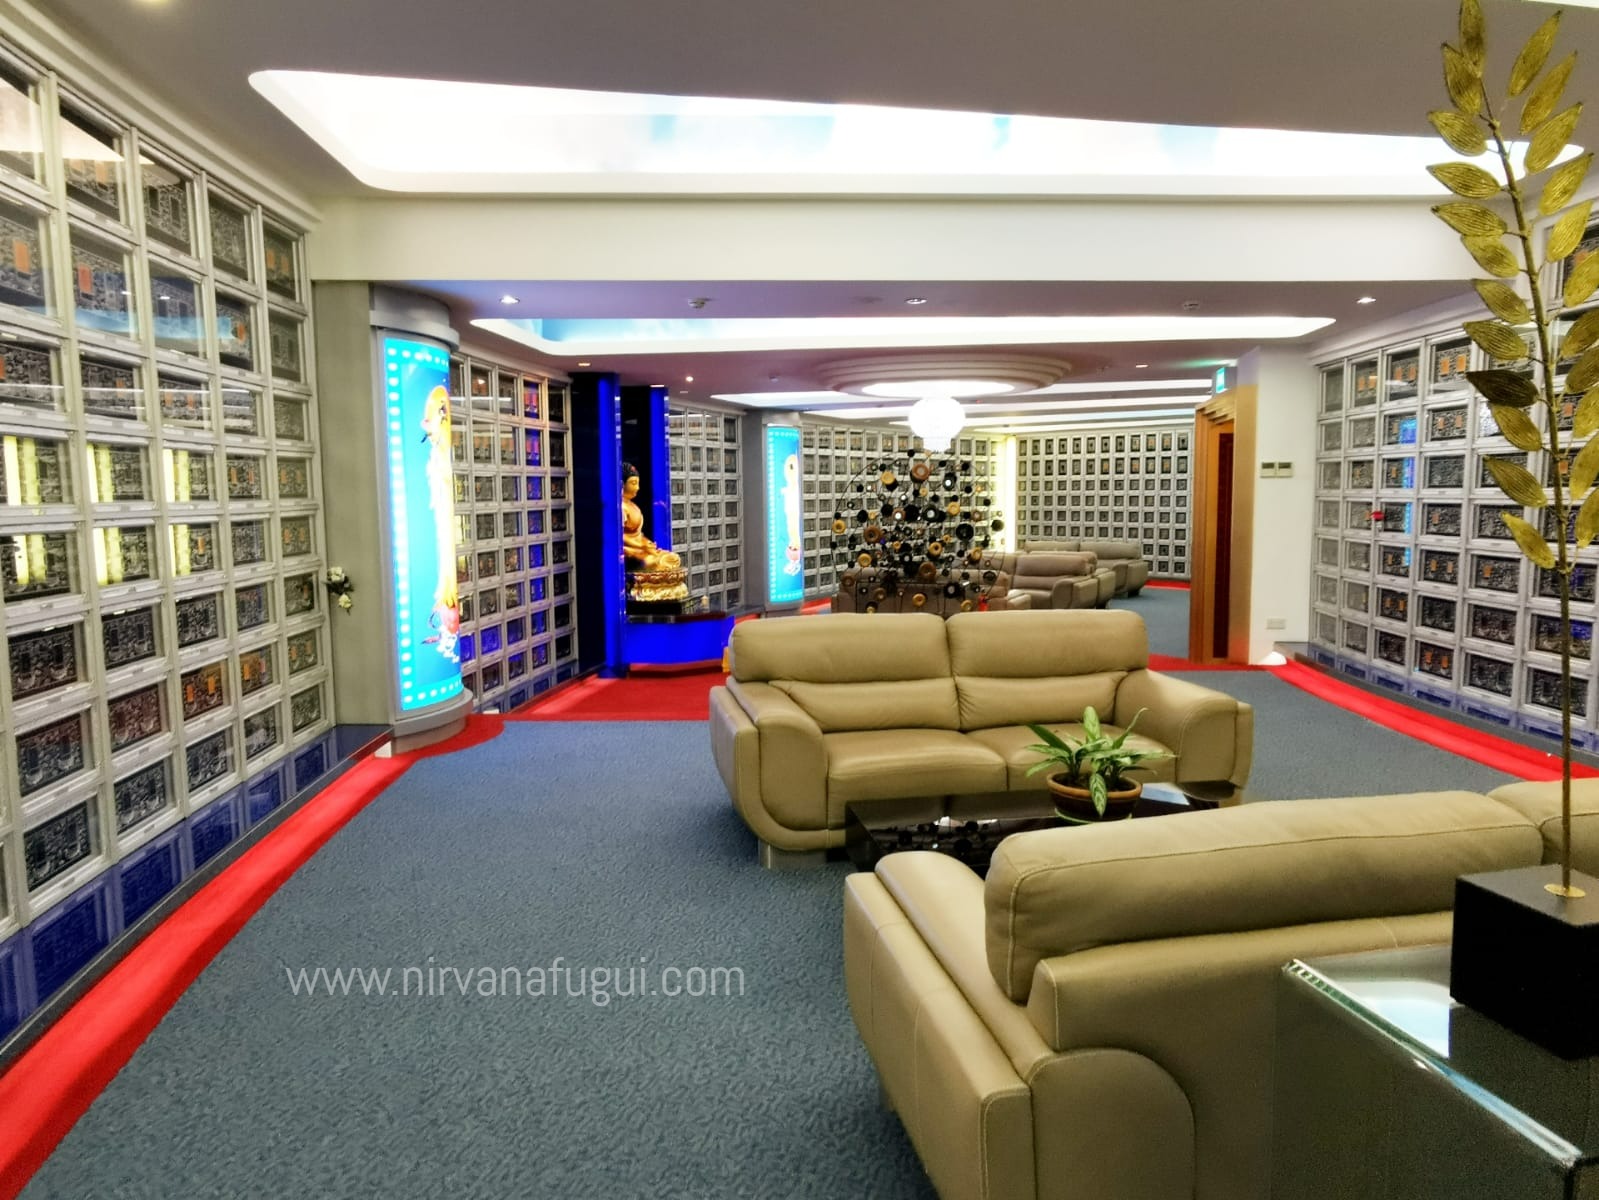 This columbarium is spacious and have the sofa seats for family members to gather.